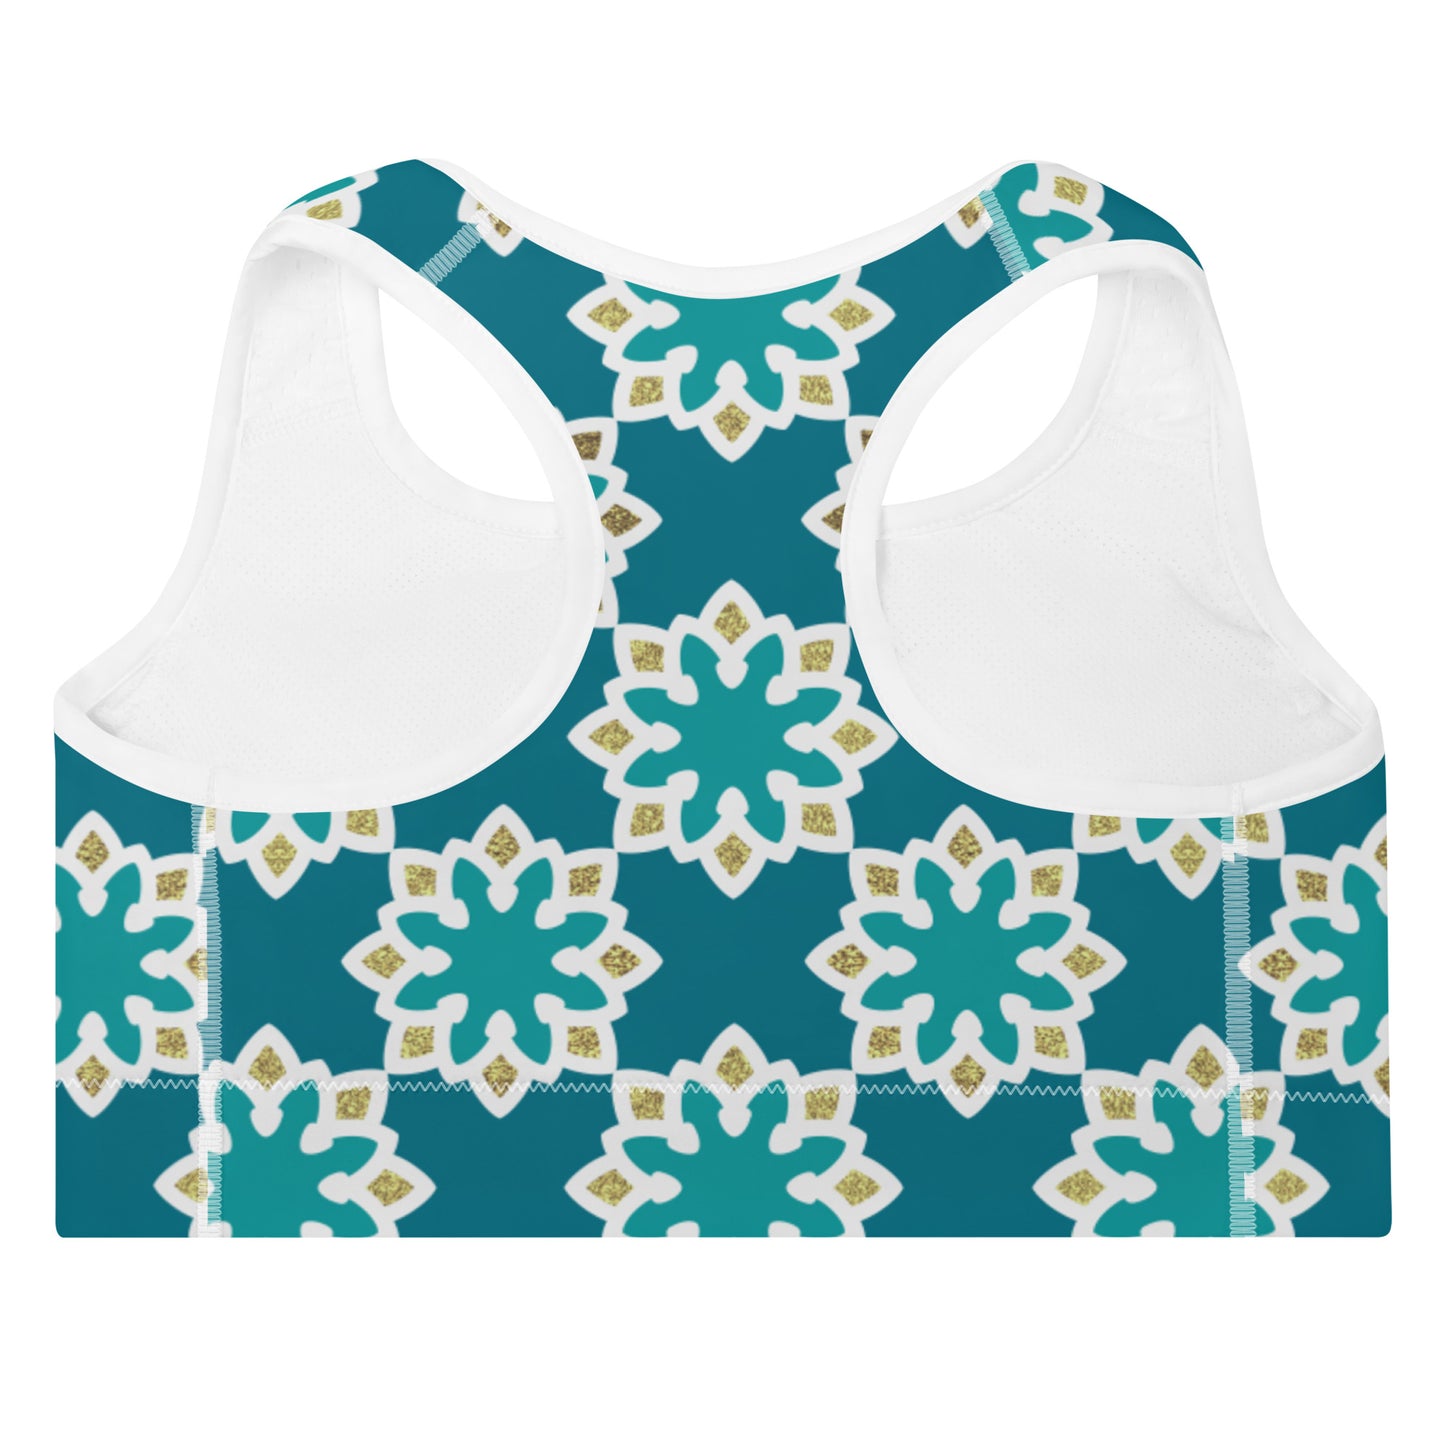 Padded Sports Bra - Arabesque flowers in Aqua and Gold